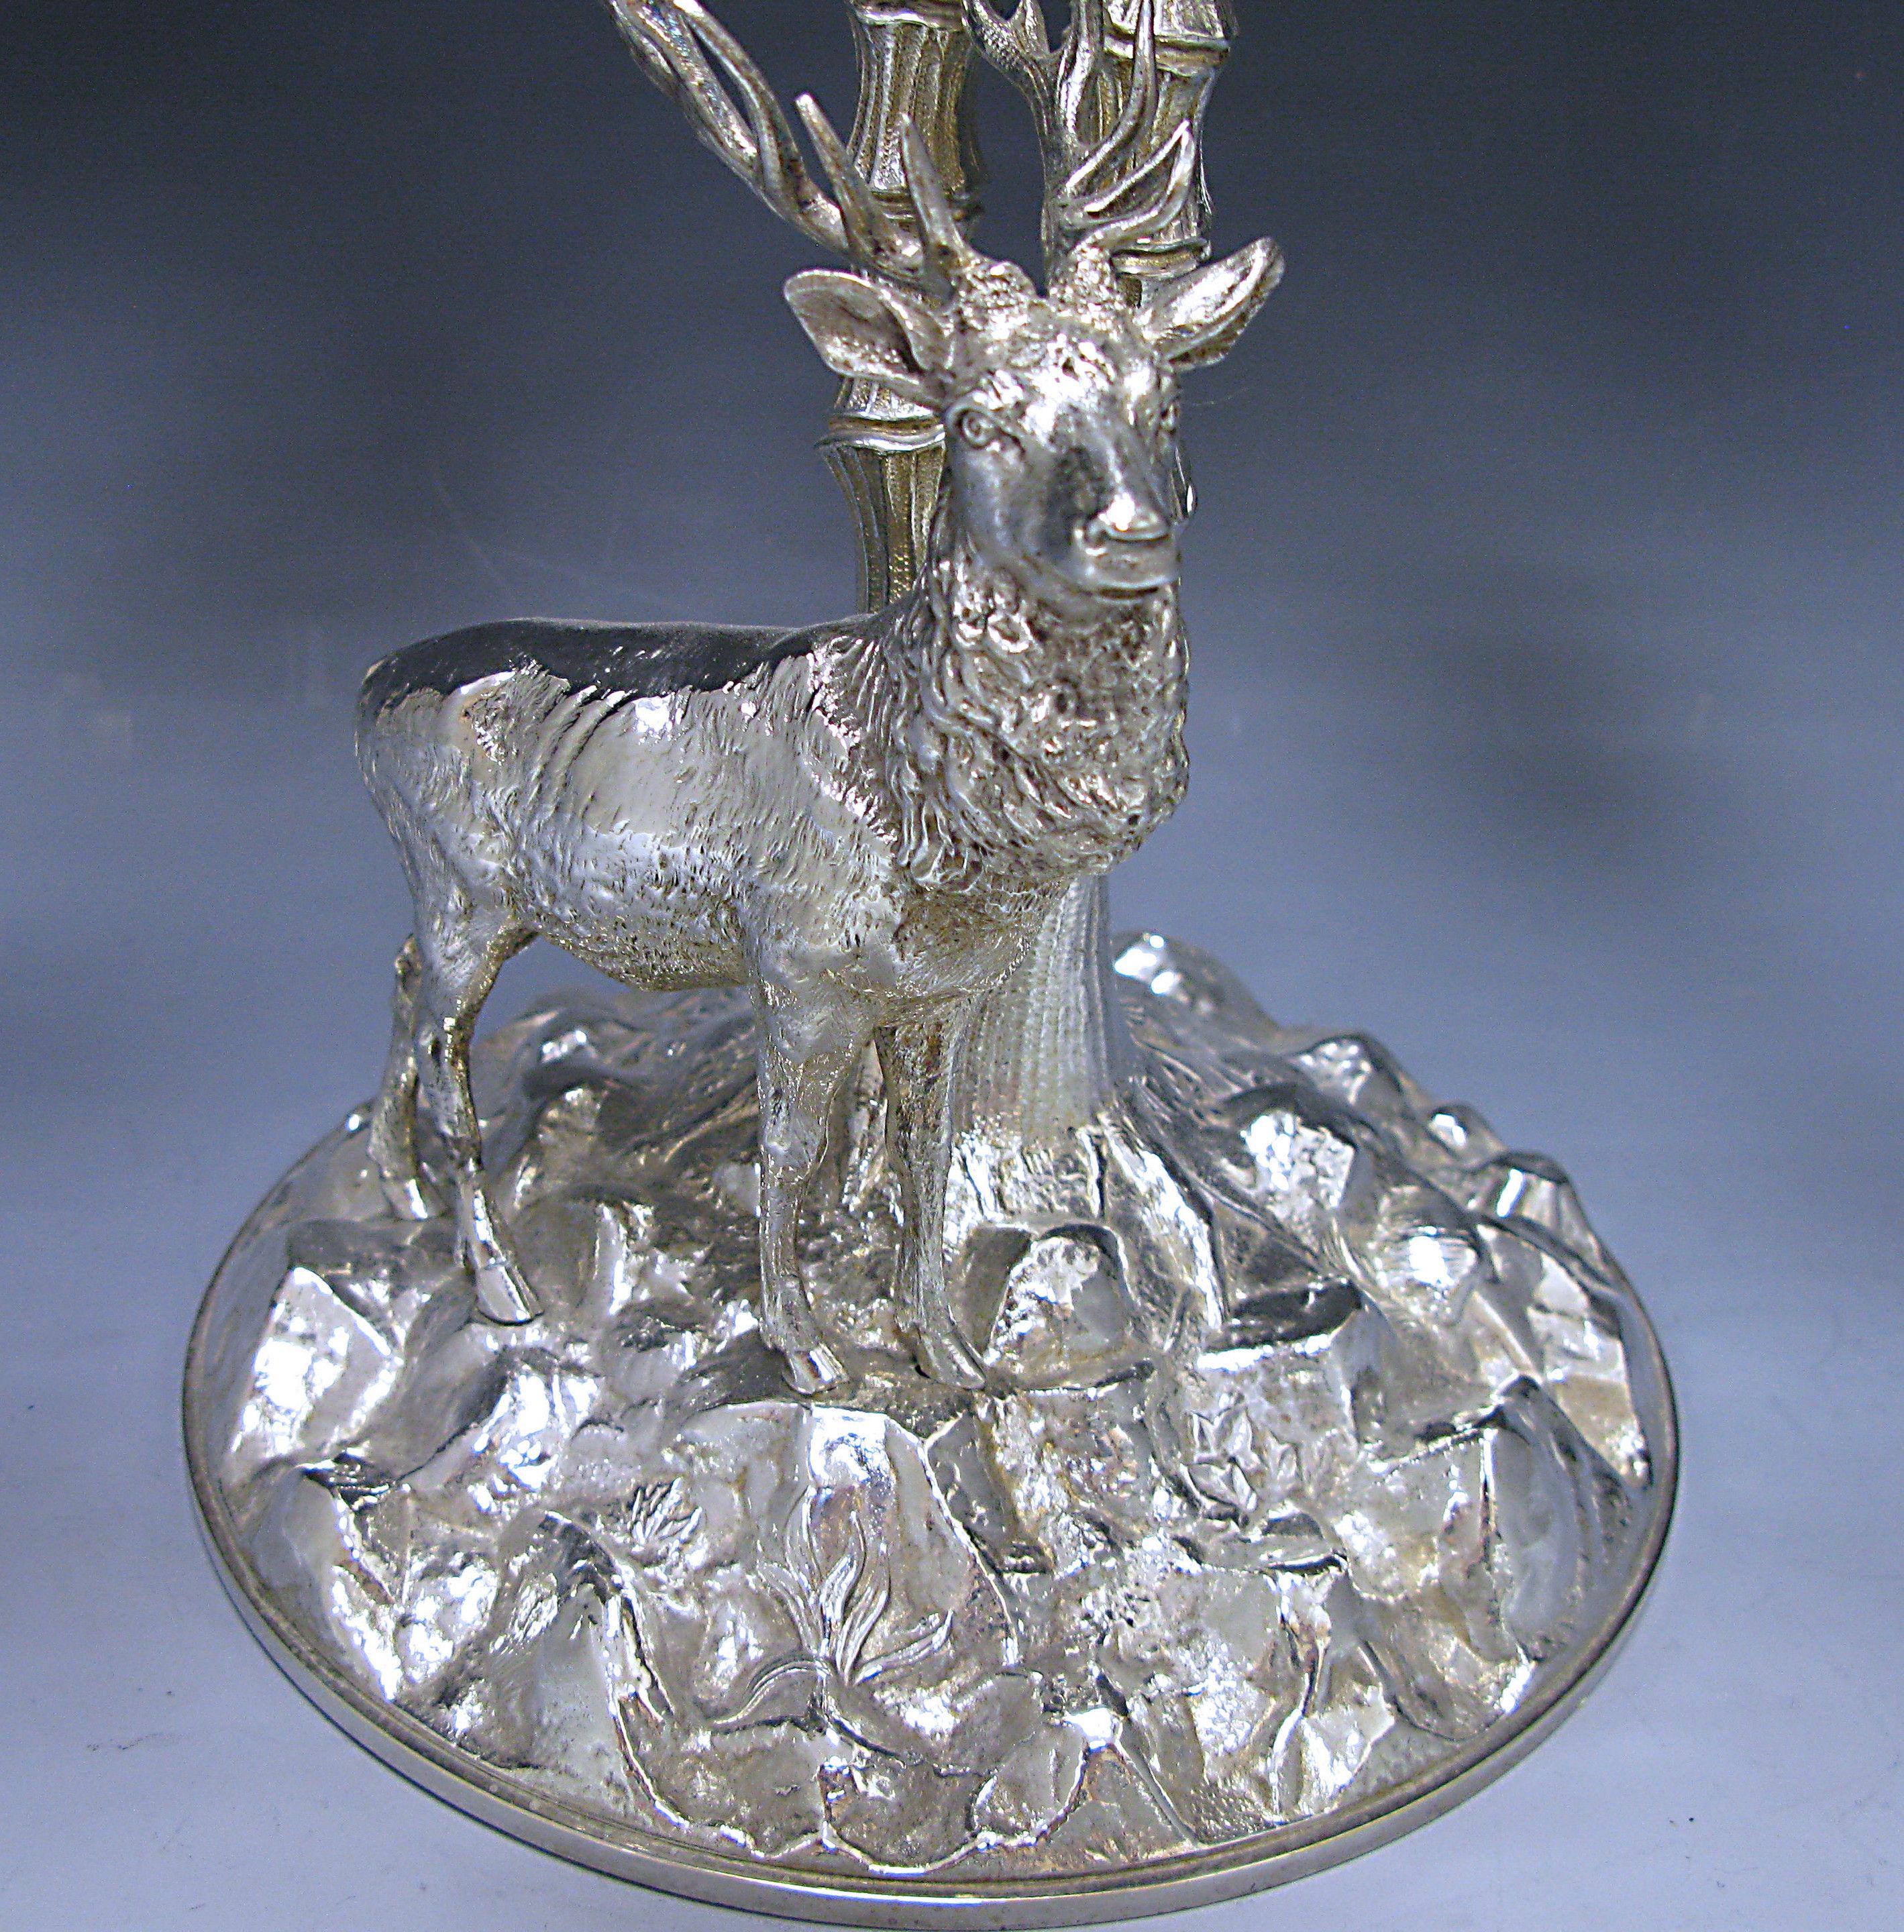 Late 19th century Victorian centrepiece composed of silver plated , cast in the form of a stag standing by two palm trees. Eight branches with leaves at their ends form the base to hold a glass dish. 

Made by WM F.

Measures: Height 15.75